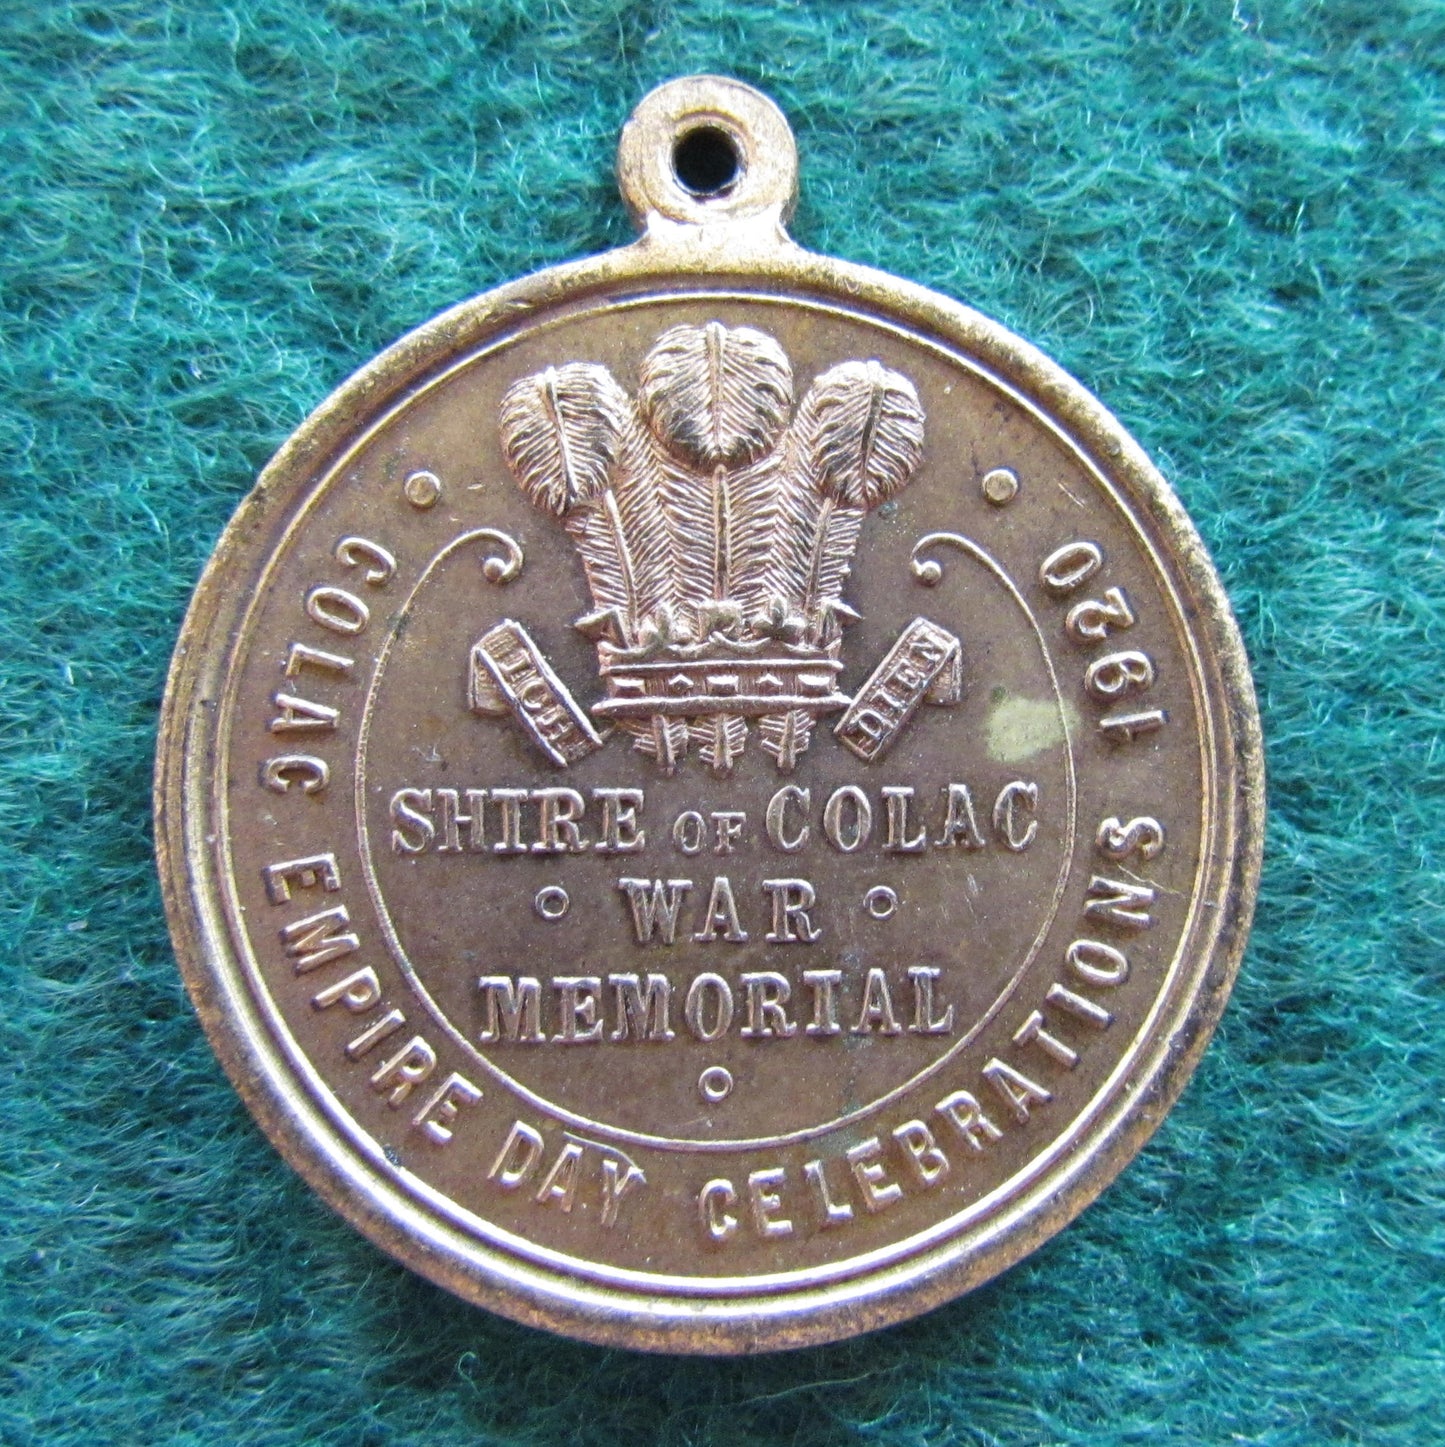 Prince of Wales Colac Empire Day Celebrations 1920 Shire Of Colac War Memorial Medallion